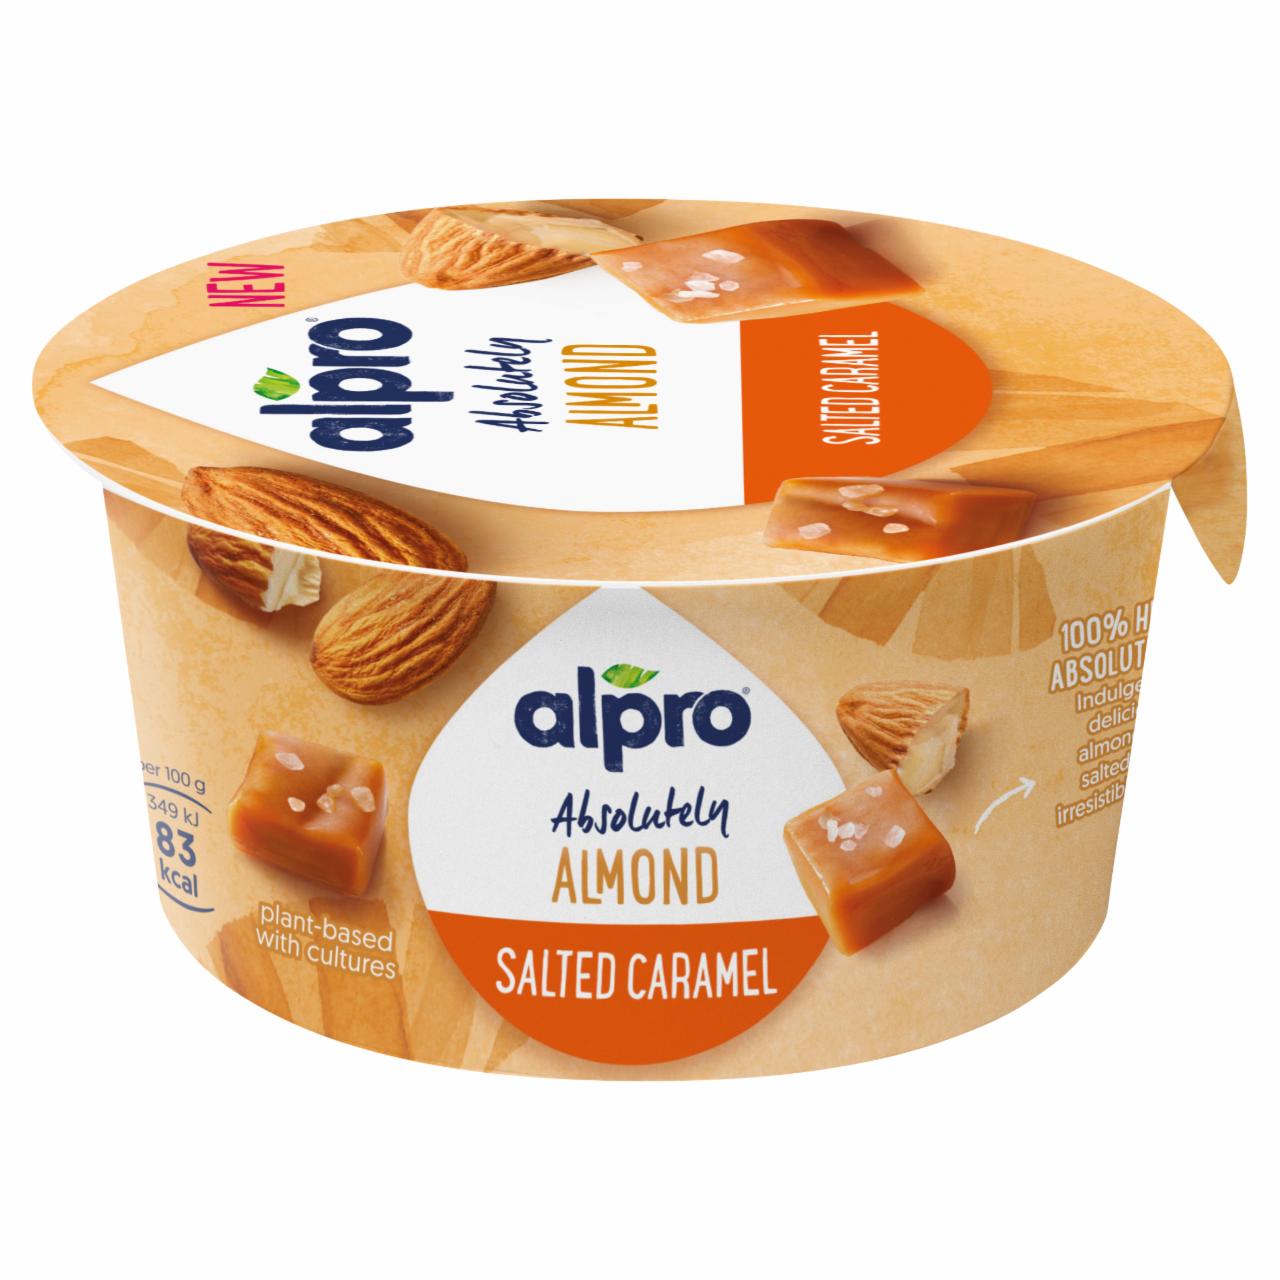 Fotografie - absolutely almond salted caramel Alpro